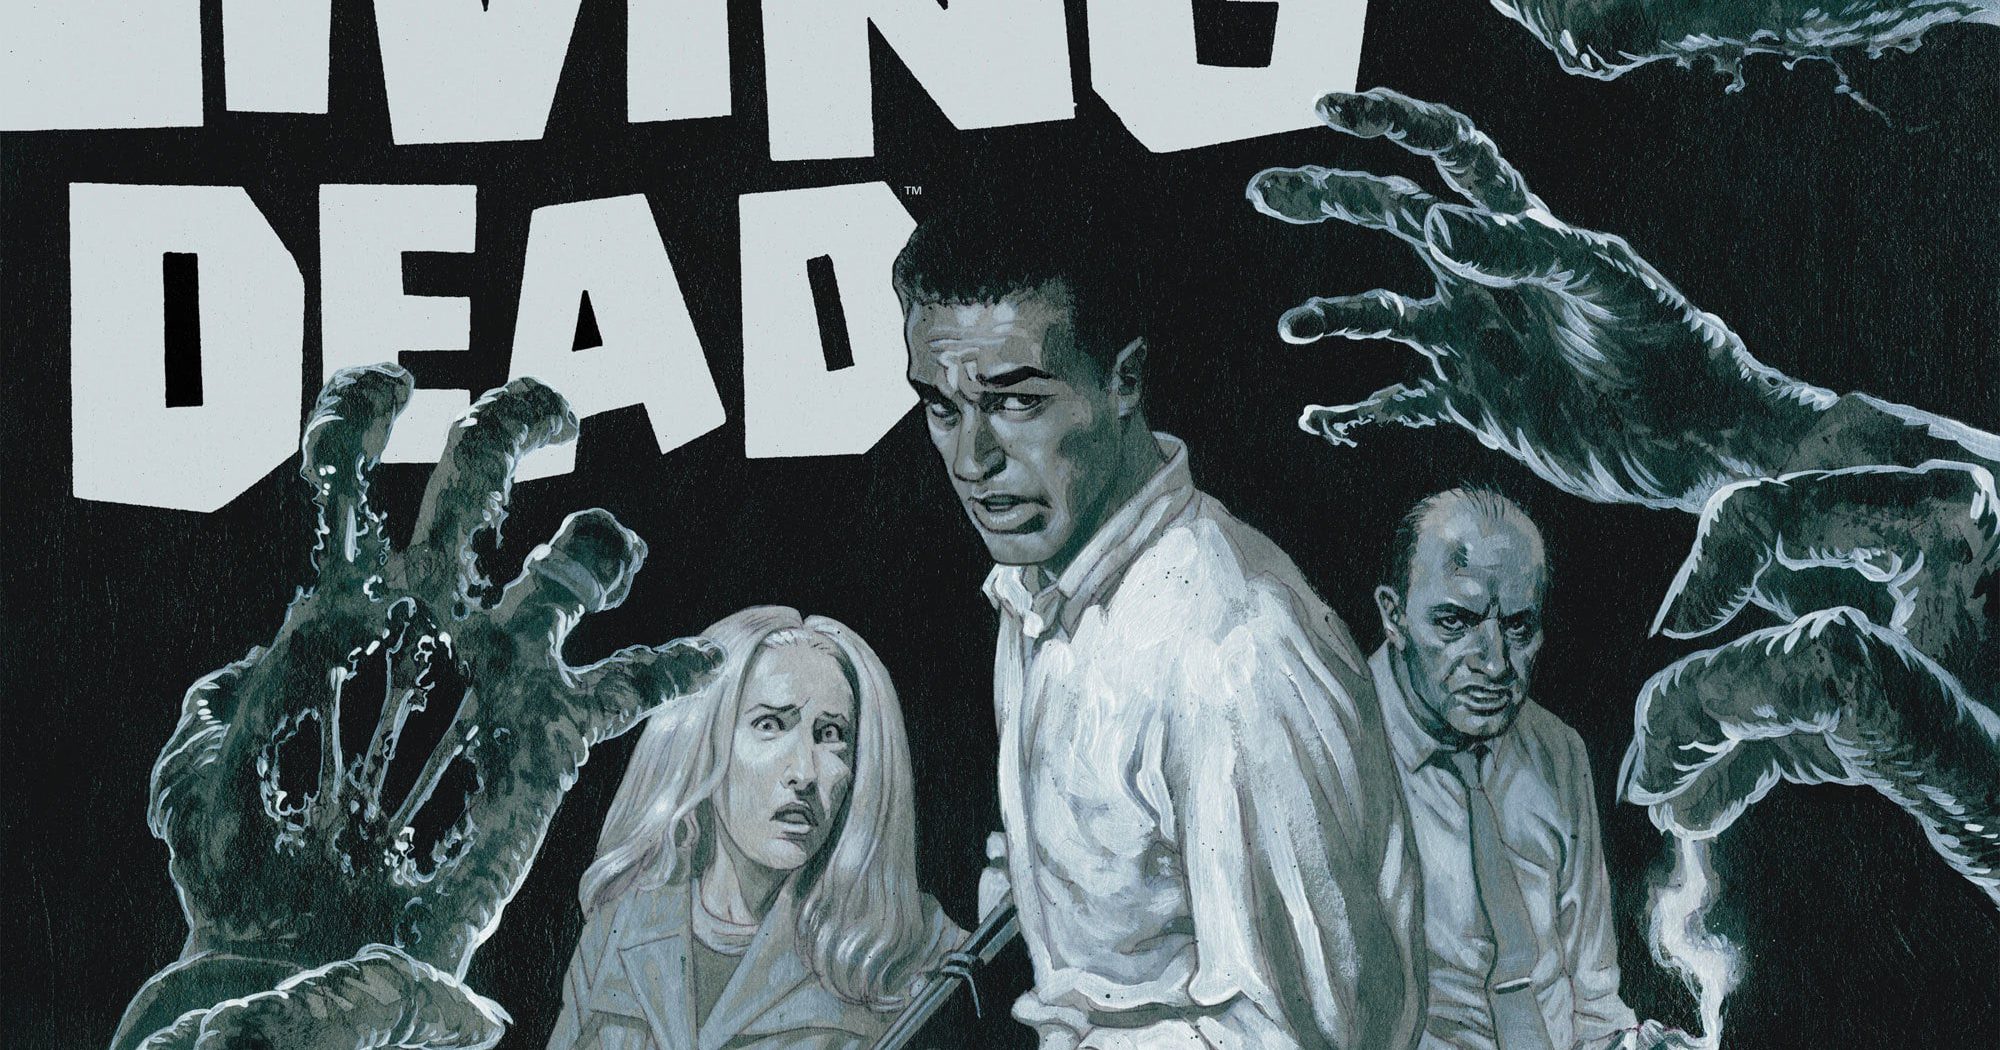 Poster for the movie "Night of the Living Dead"